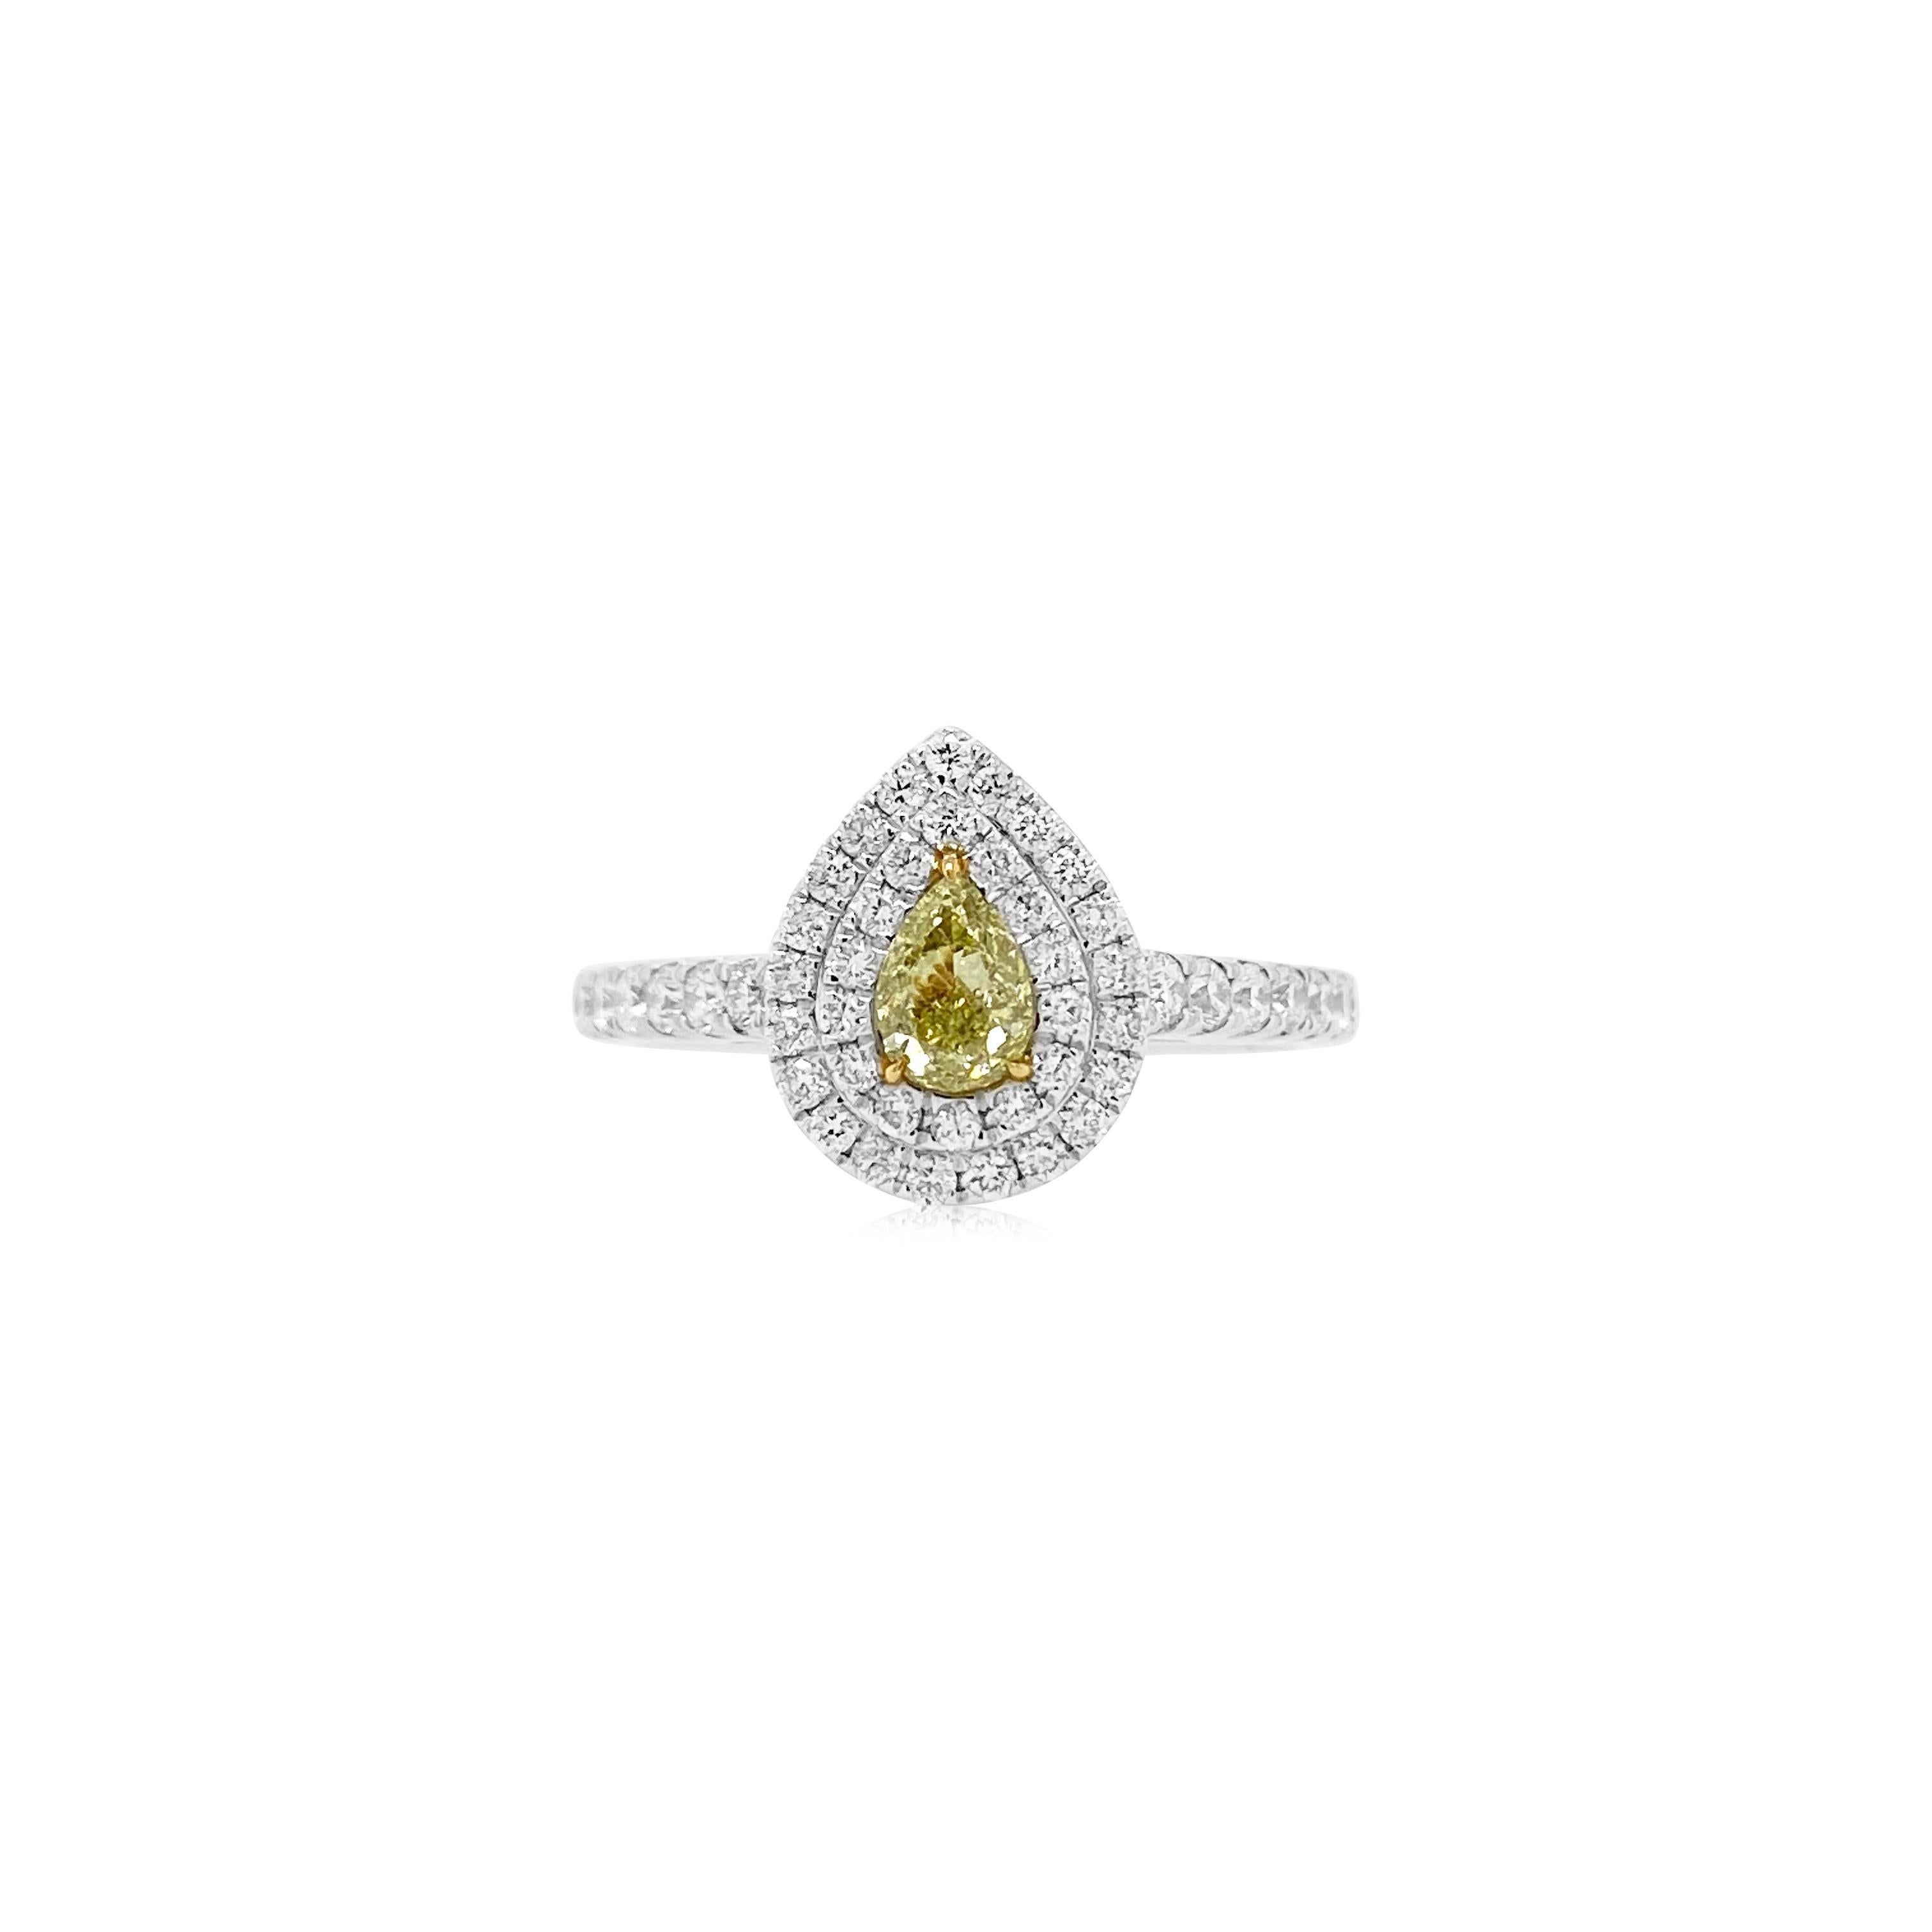 This classic Fancy Yellow Diamond and White diamond Pear shape Engagement Ring is a beautiful rendition of modern yet classic cut design and natural rare color diamonds.


-	Centre Diamond is CGL Lab Certified Fancy Yellow diamond – 0.301 ct
-	Round